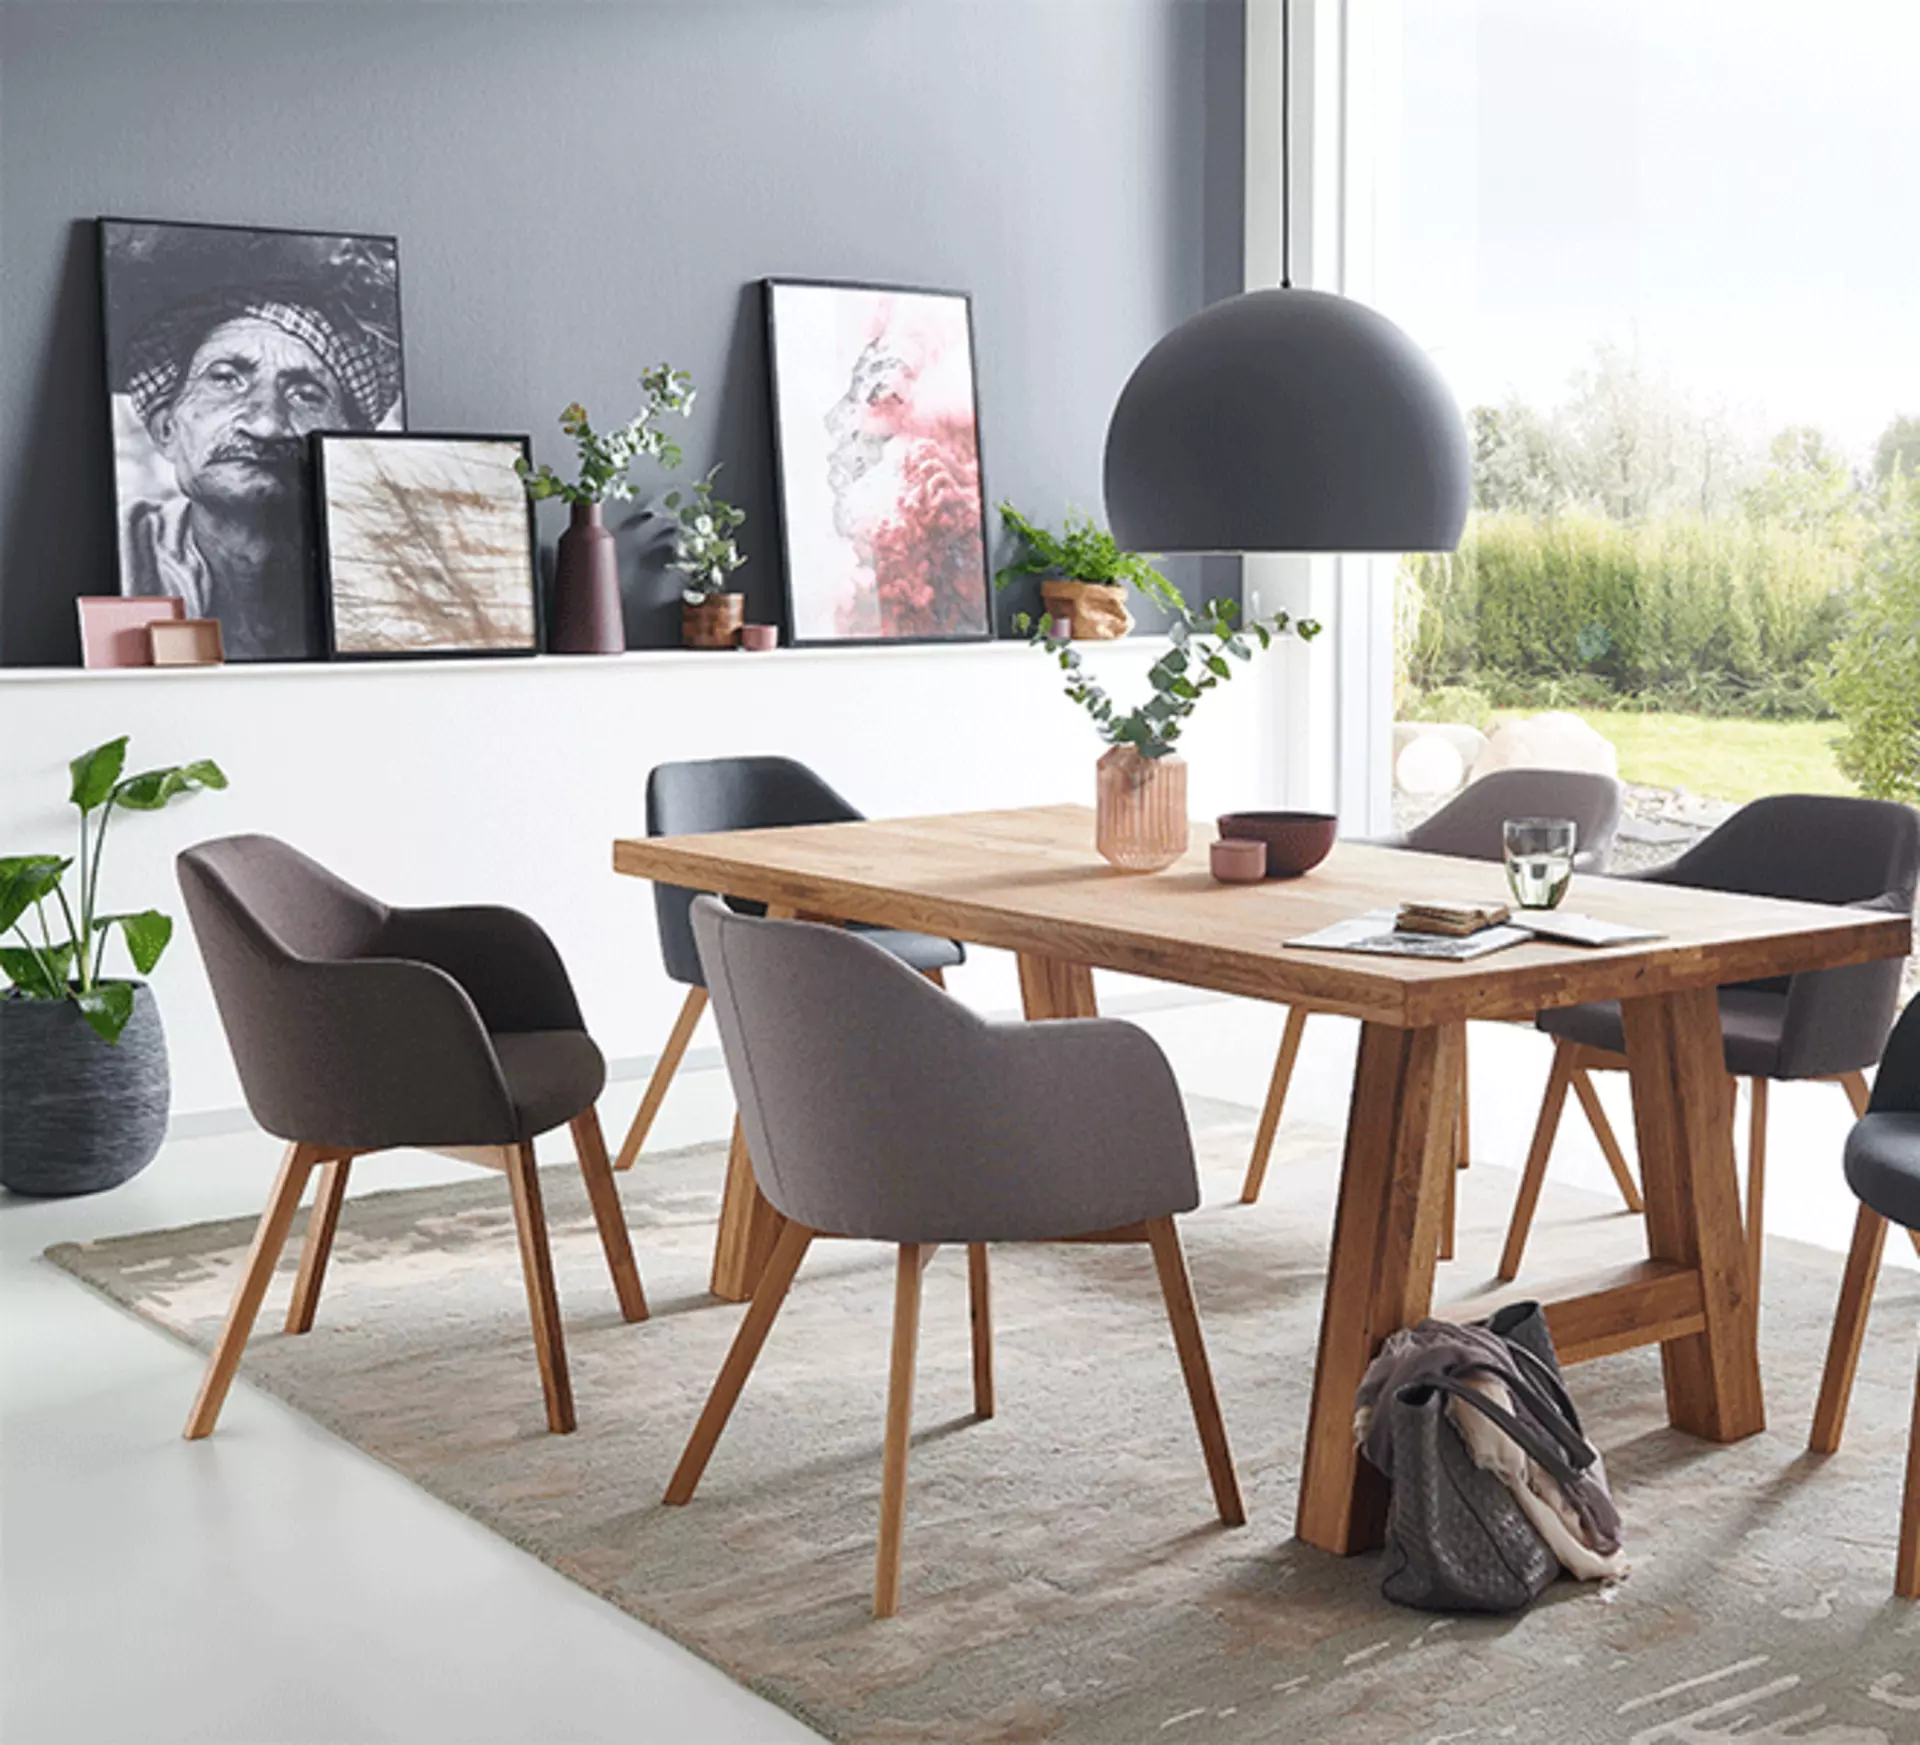 Modern Country Dining - Esszimmer